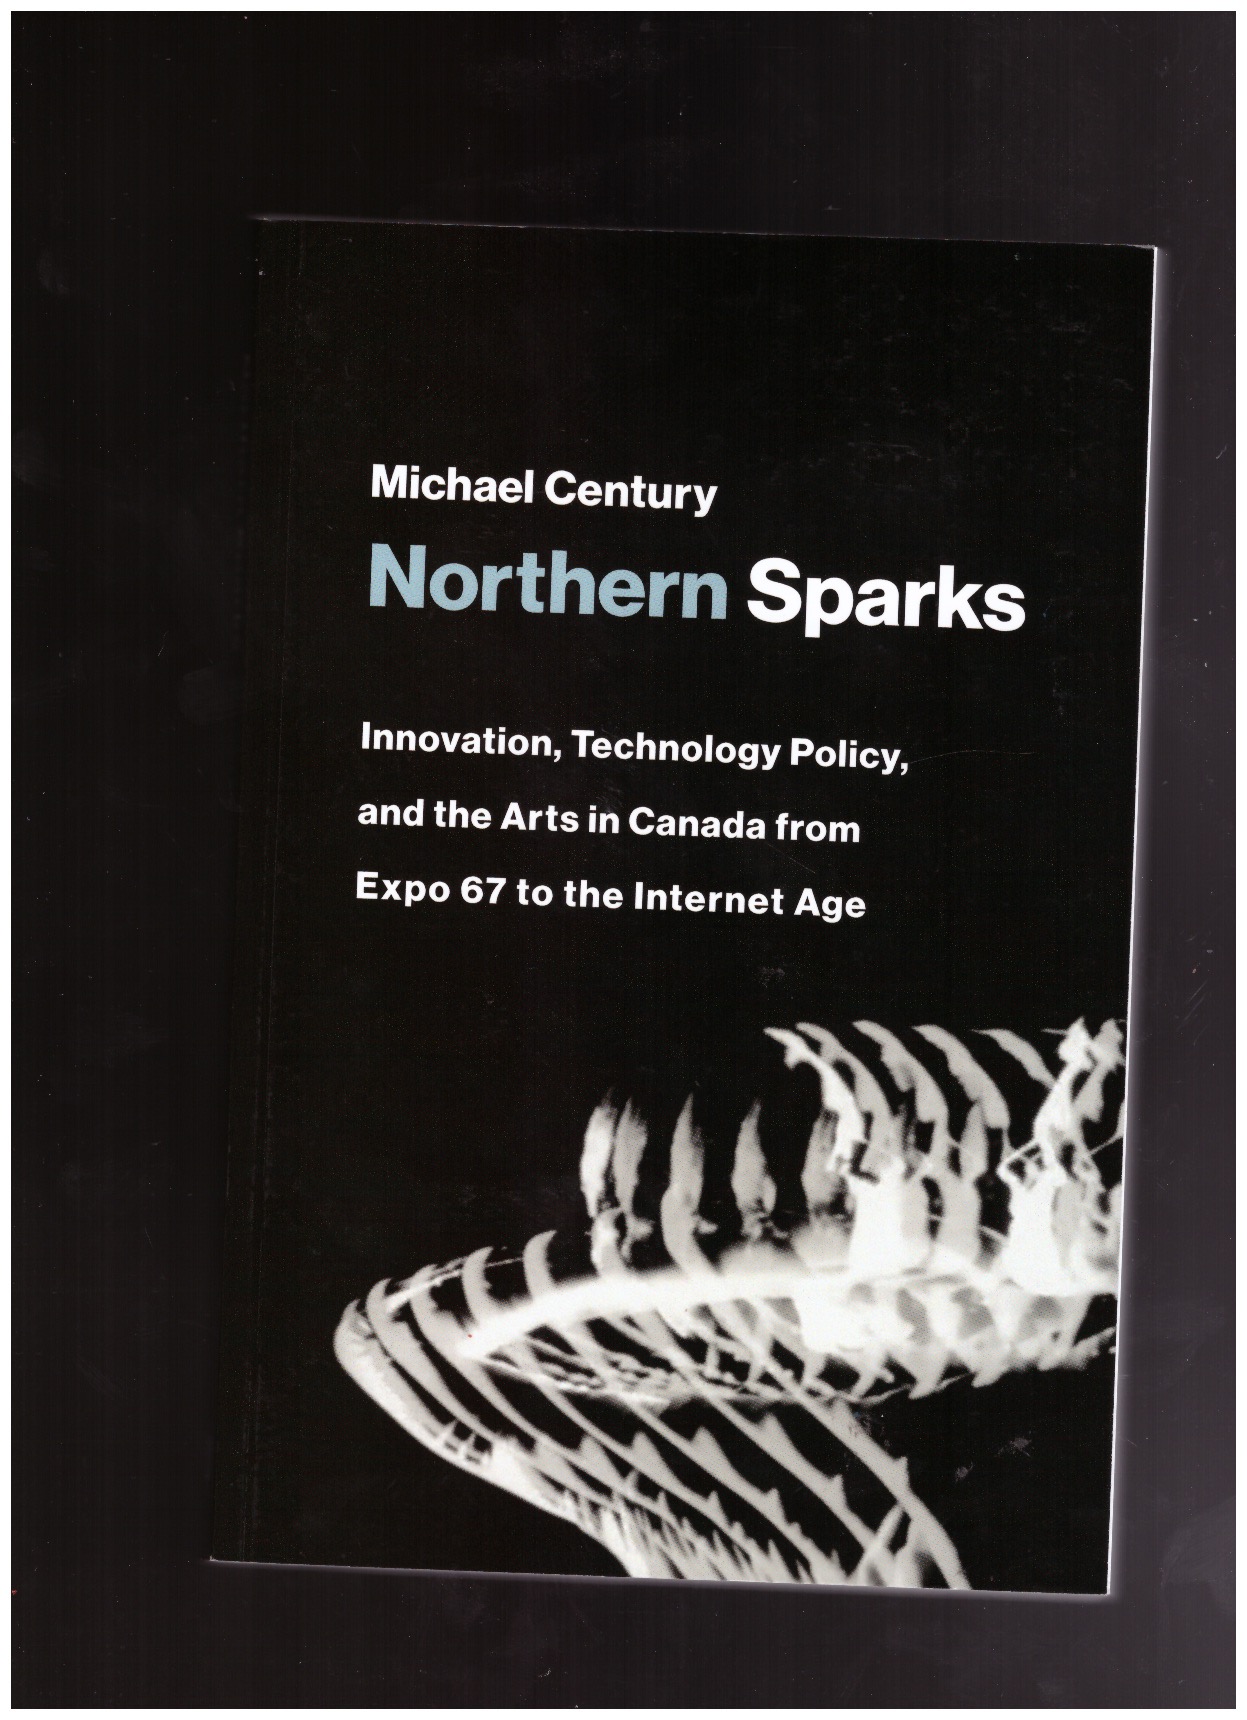 CENTURY, Michael - Northern Sparks. Innovation, Technology Policy, and the Arts in Canada from Expo 67 to the Internet Age